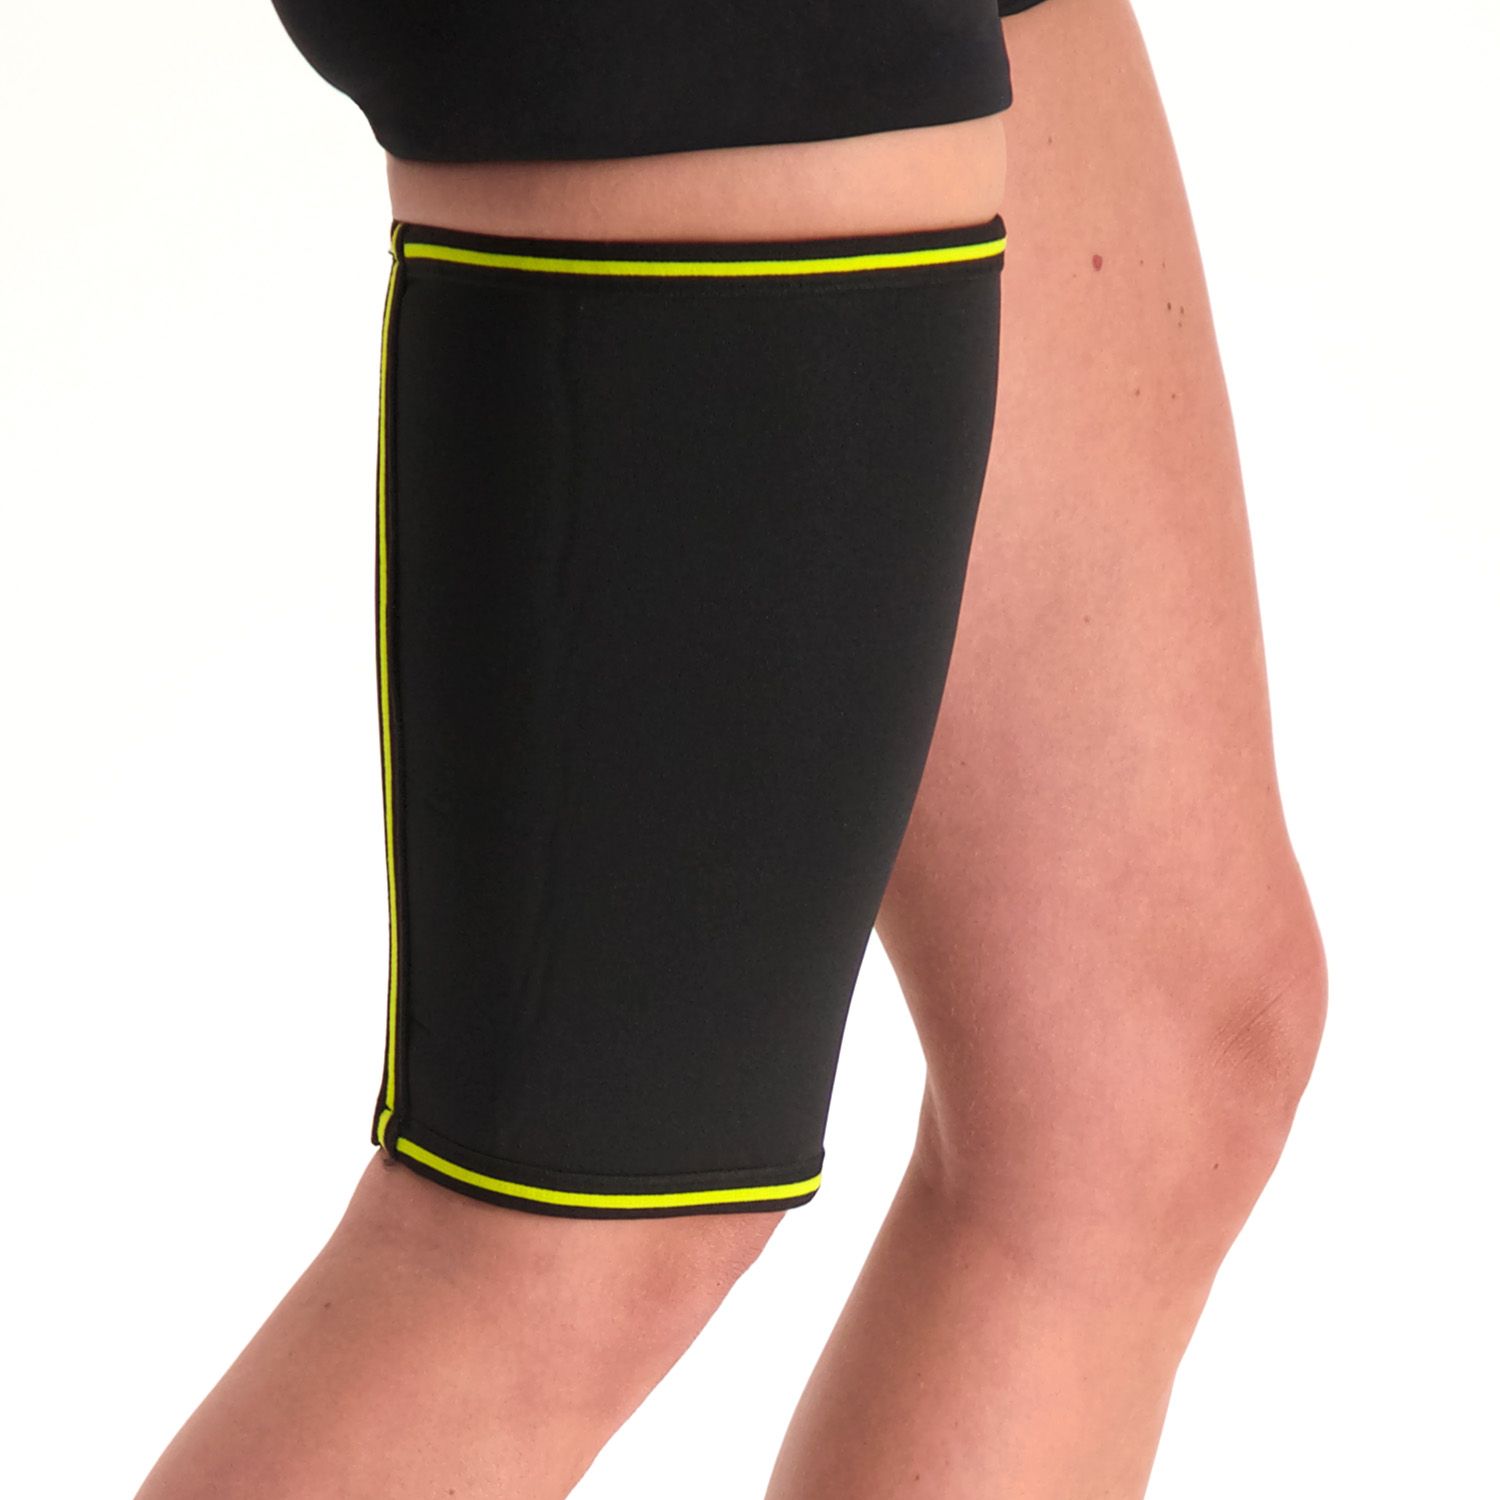 novamed thigh support product information